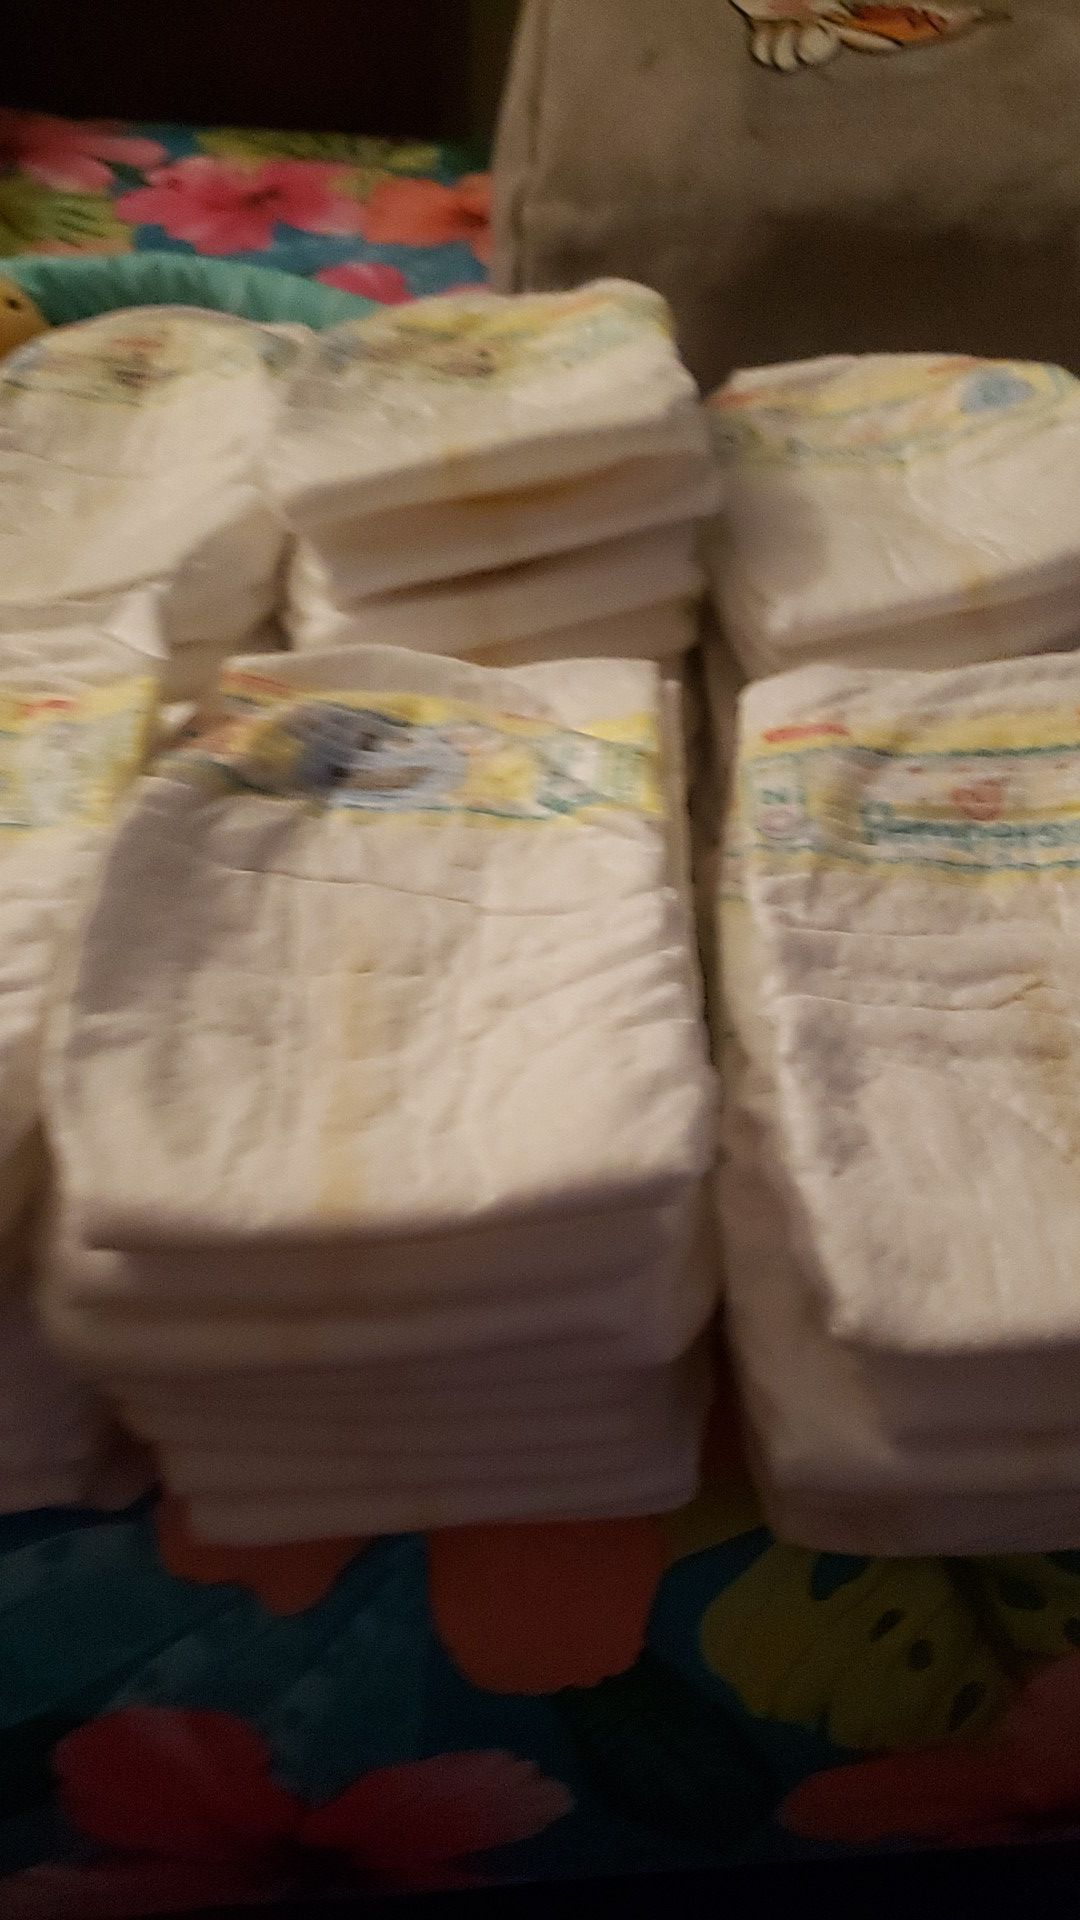 57 Pampers Newborn diapers plus 13 extra Walmart diapers